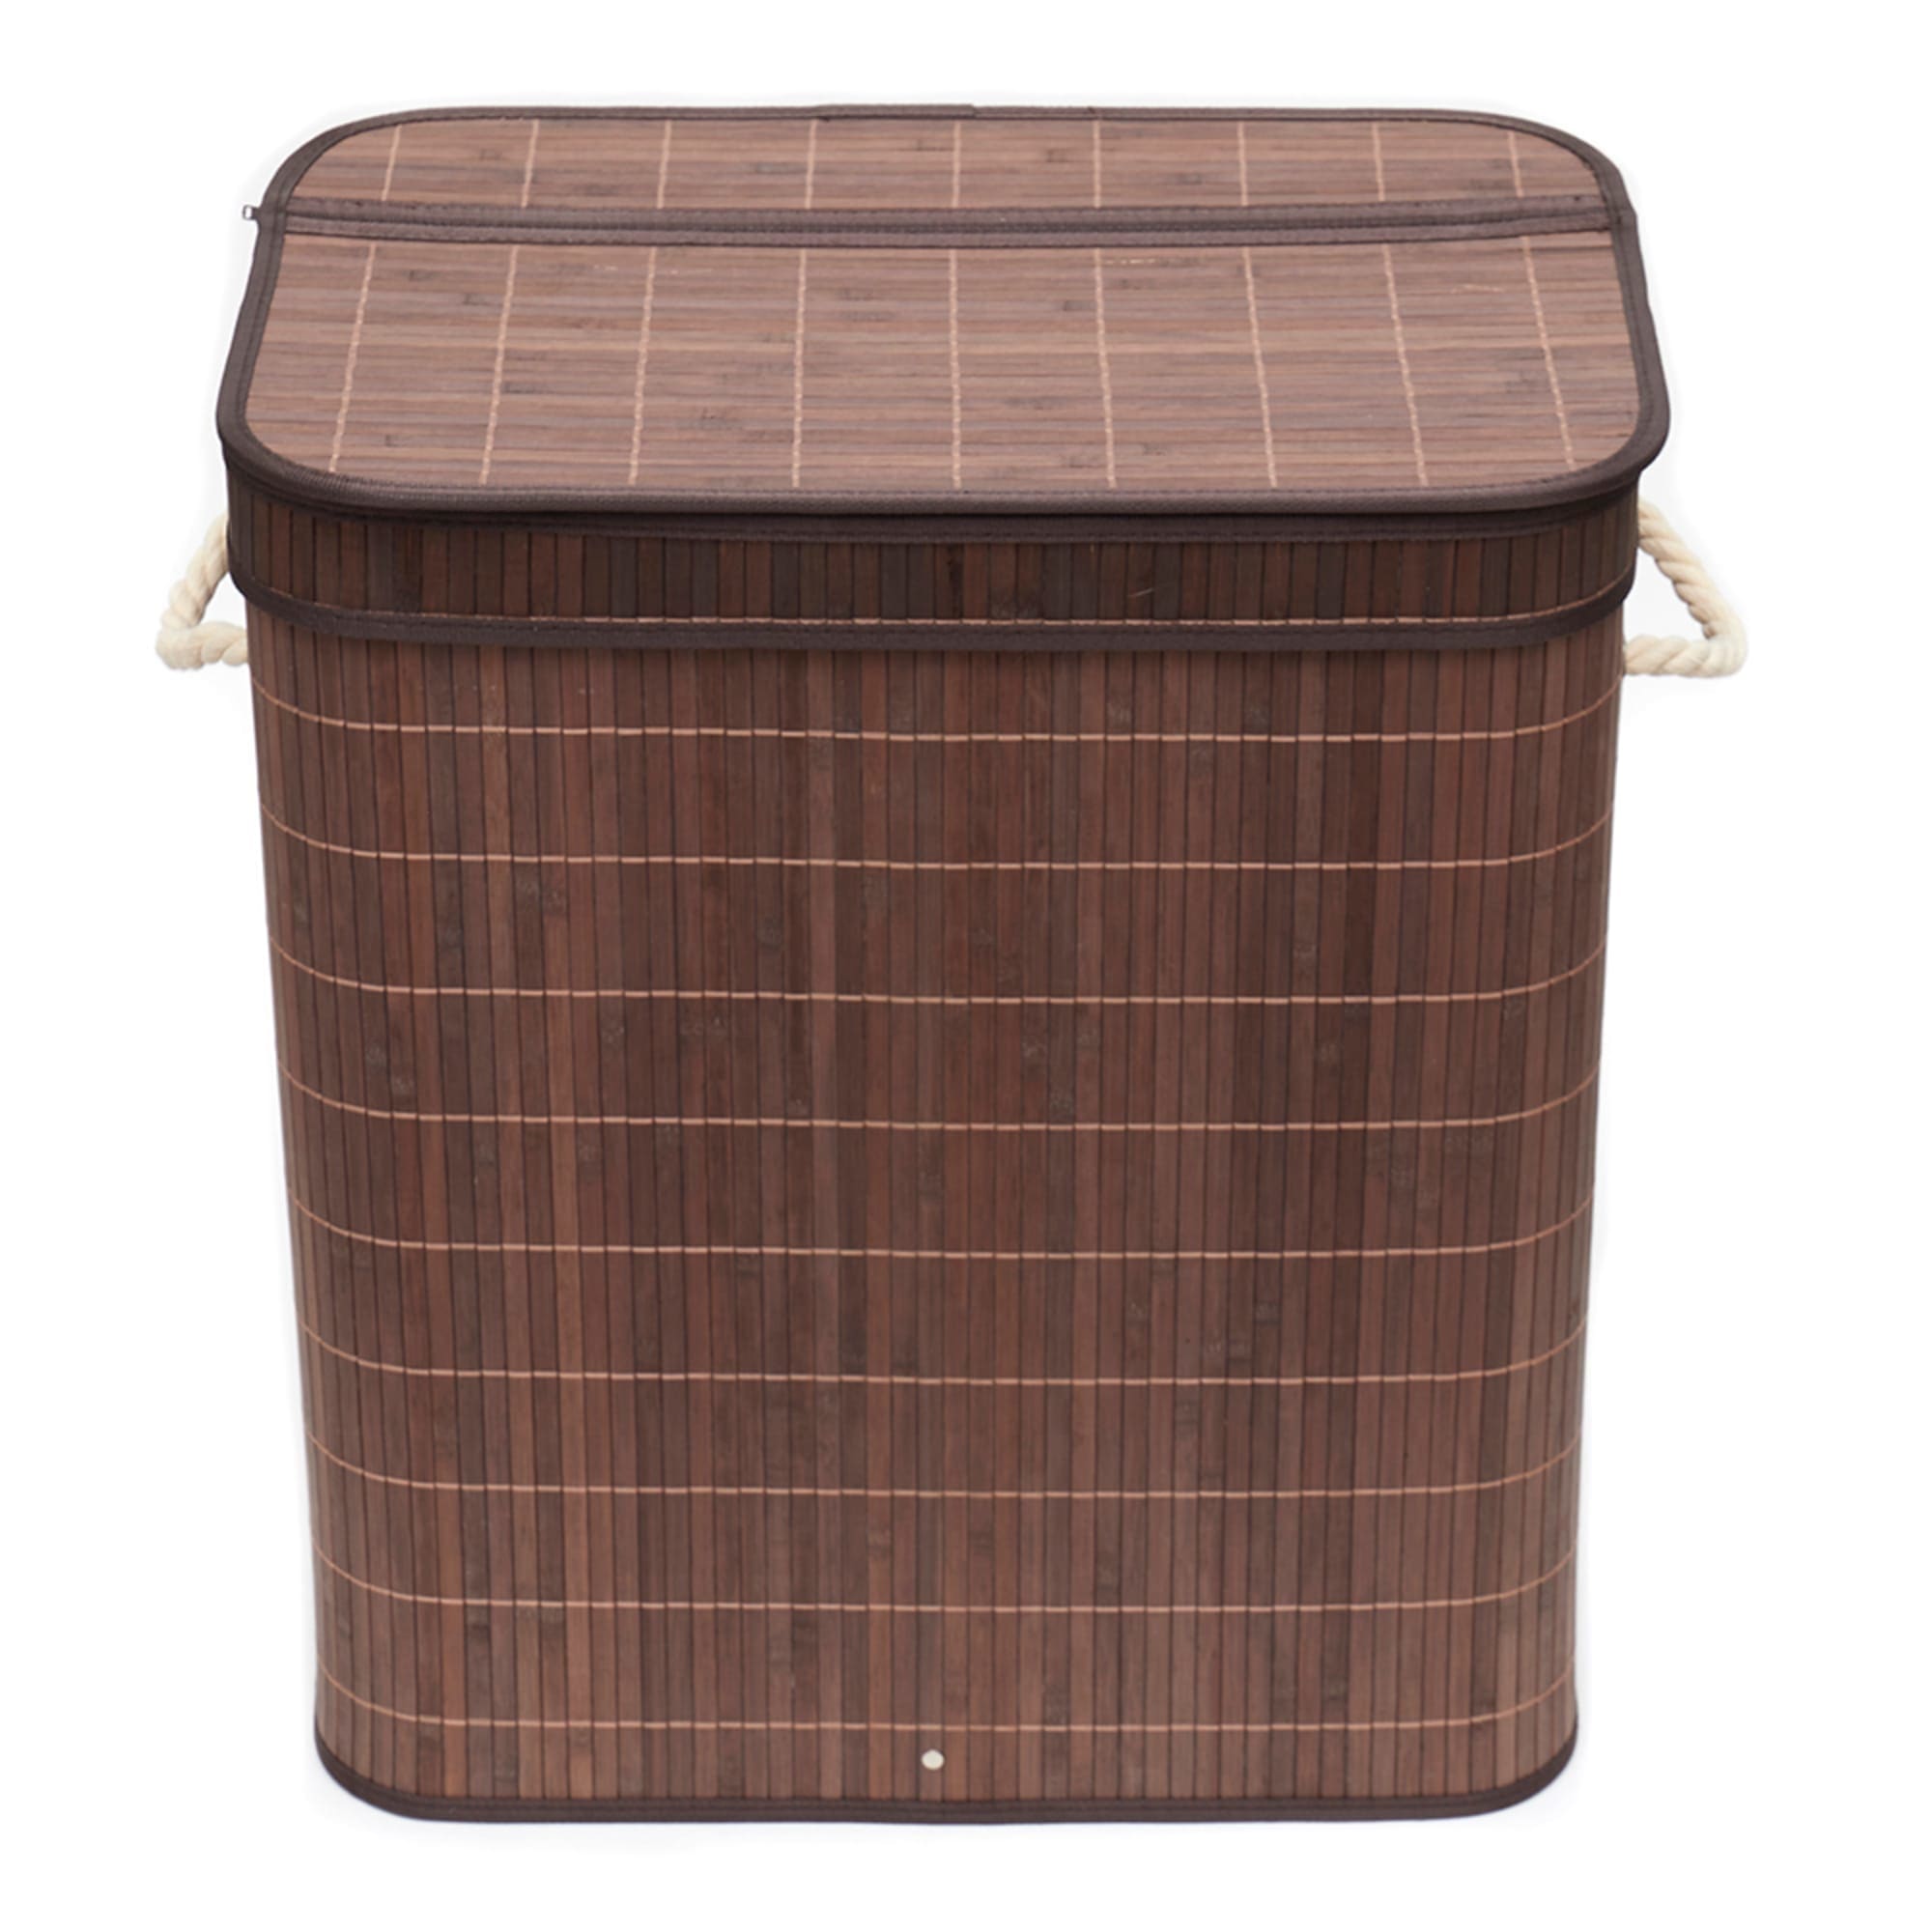 Home Basics 2 Compartment Foldable Rectangle Bamboo Hamper with Liner, Brown $25.00 EACH, CASE PACK OF 6